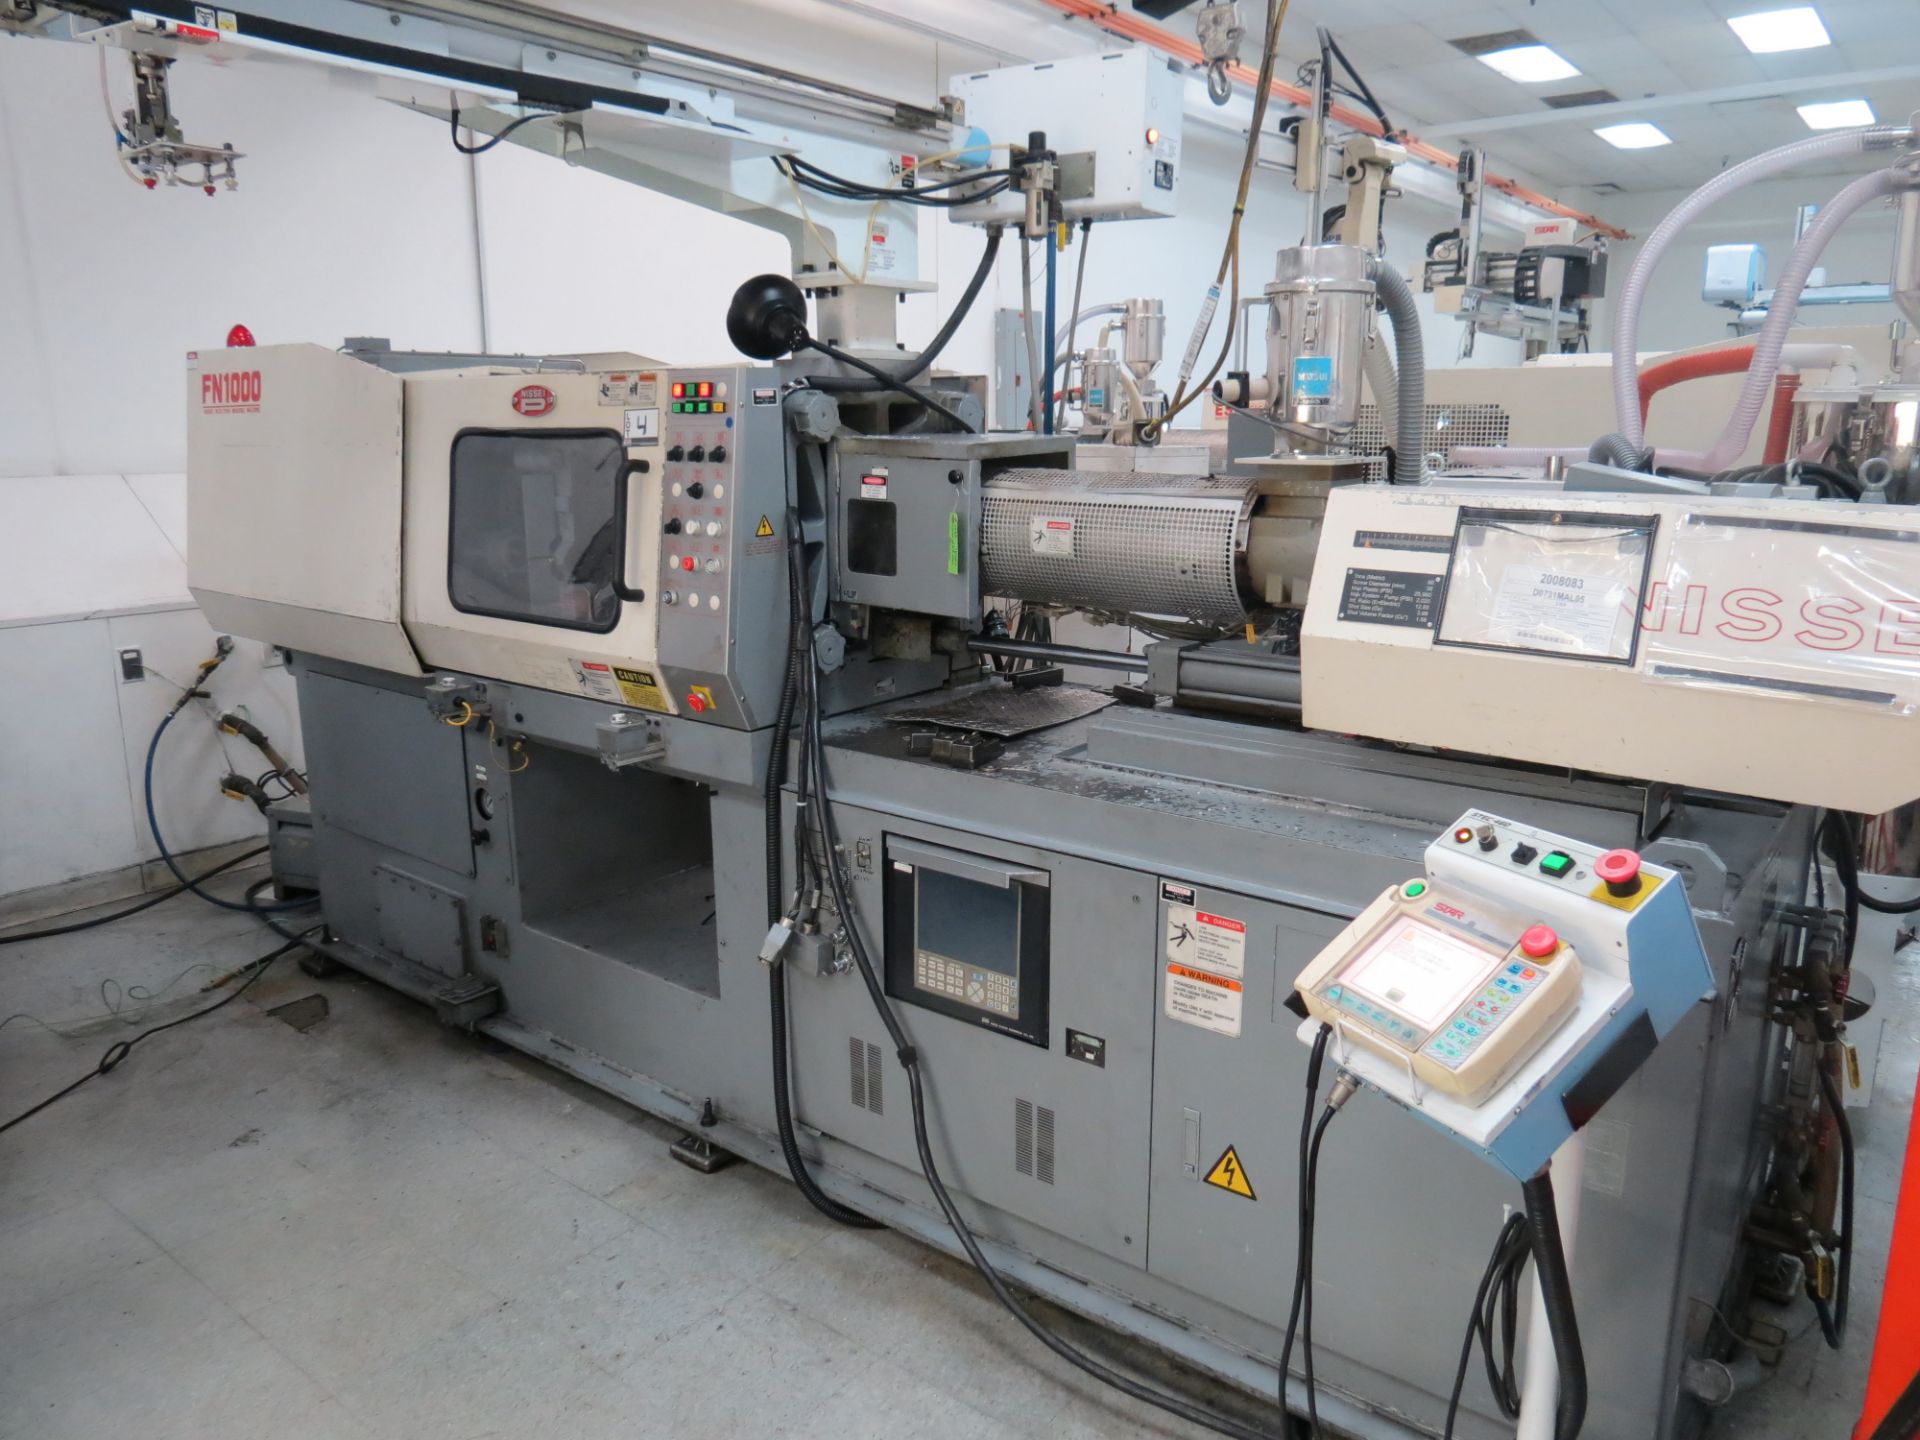 88 Ton Nissei Injection Molding Machine Mdl # FN1000-12A, NC9300ST Control, S/N # SO8U069, 1999 - Image 2 of 5